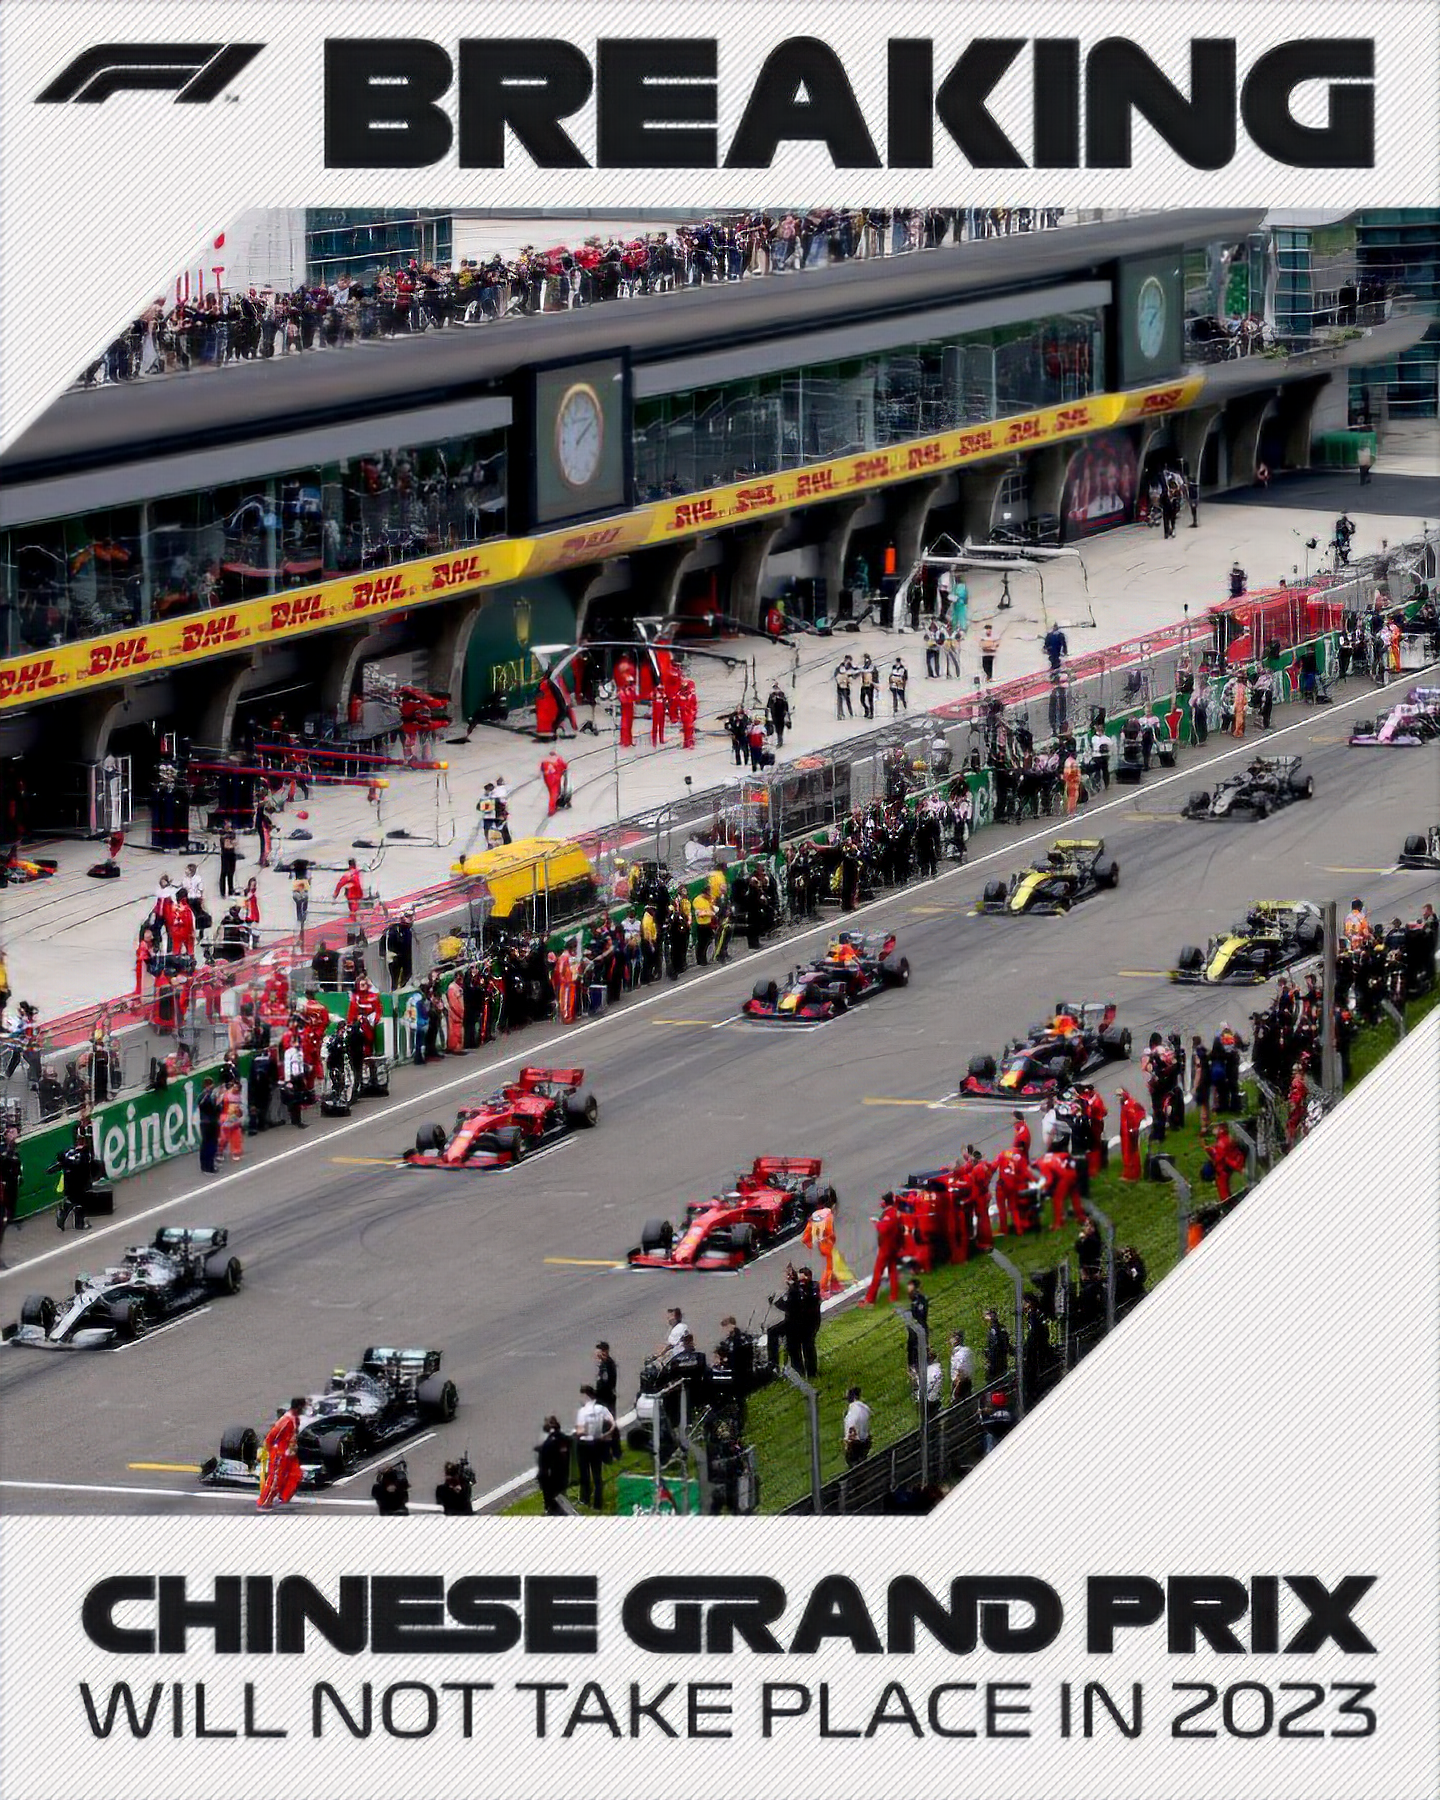 Image describing Chinese Grand Prix will not take place in 2023